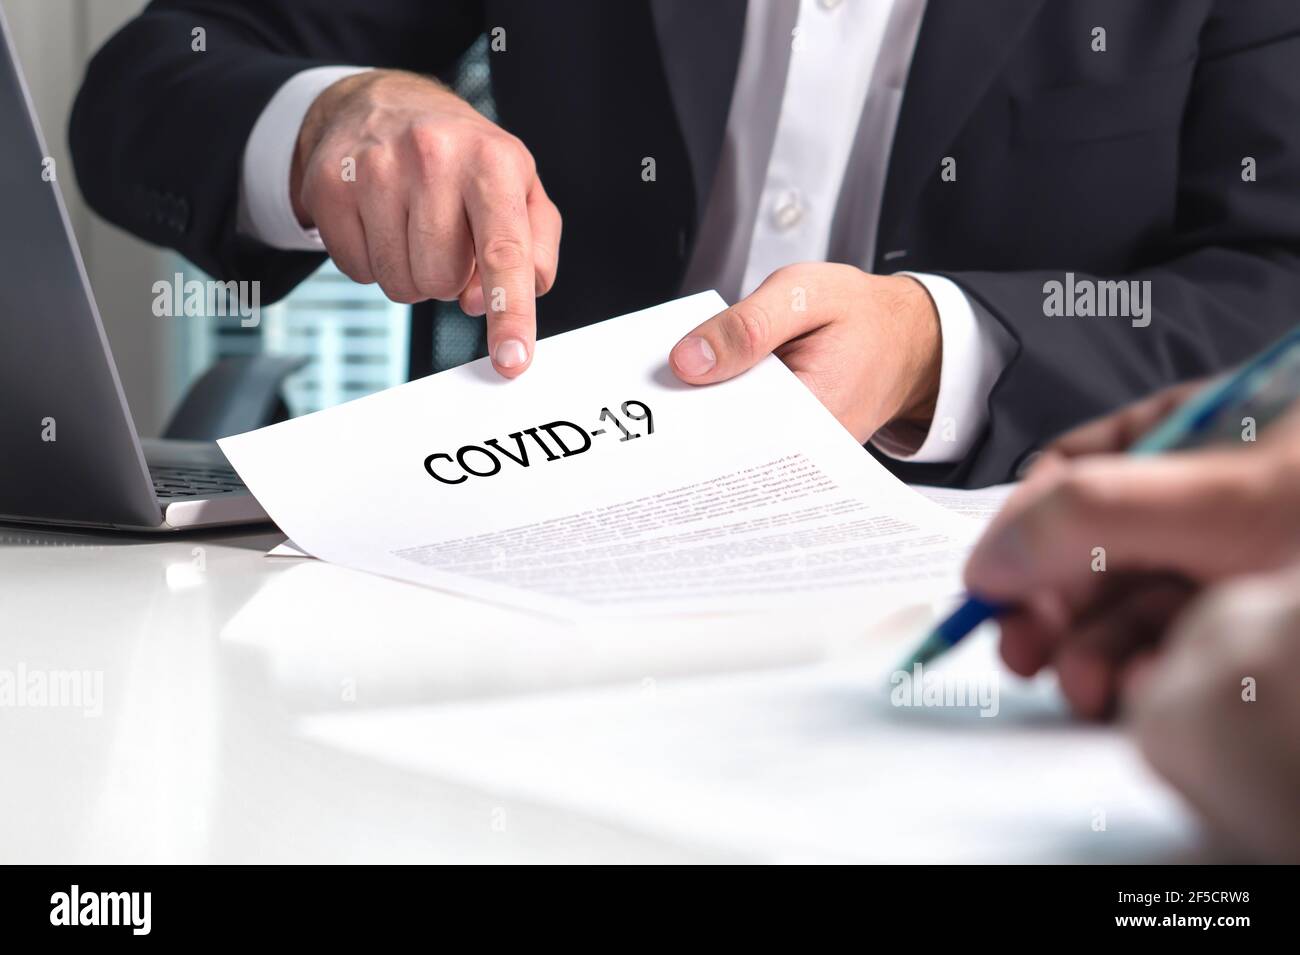 Covid and business. Financial support and help plan for corona virus economic impact and revenue loss. Finance of legal meeting in office. Stock Photo